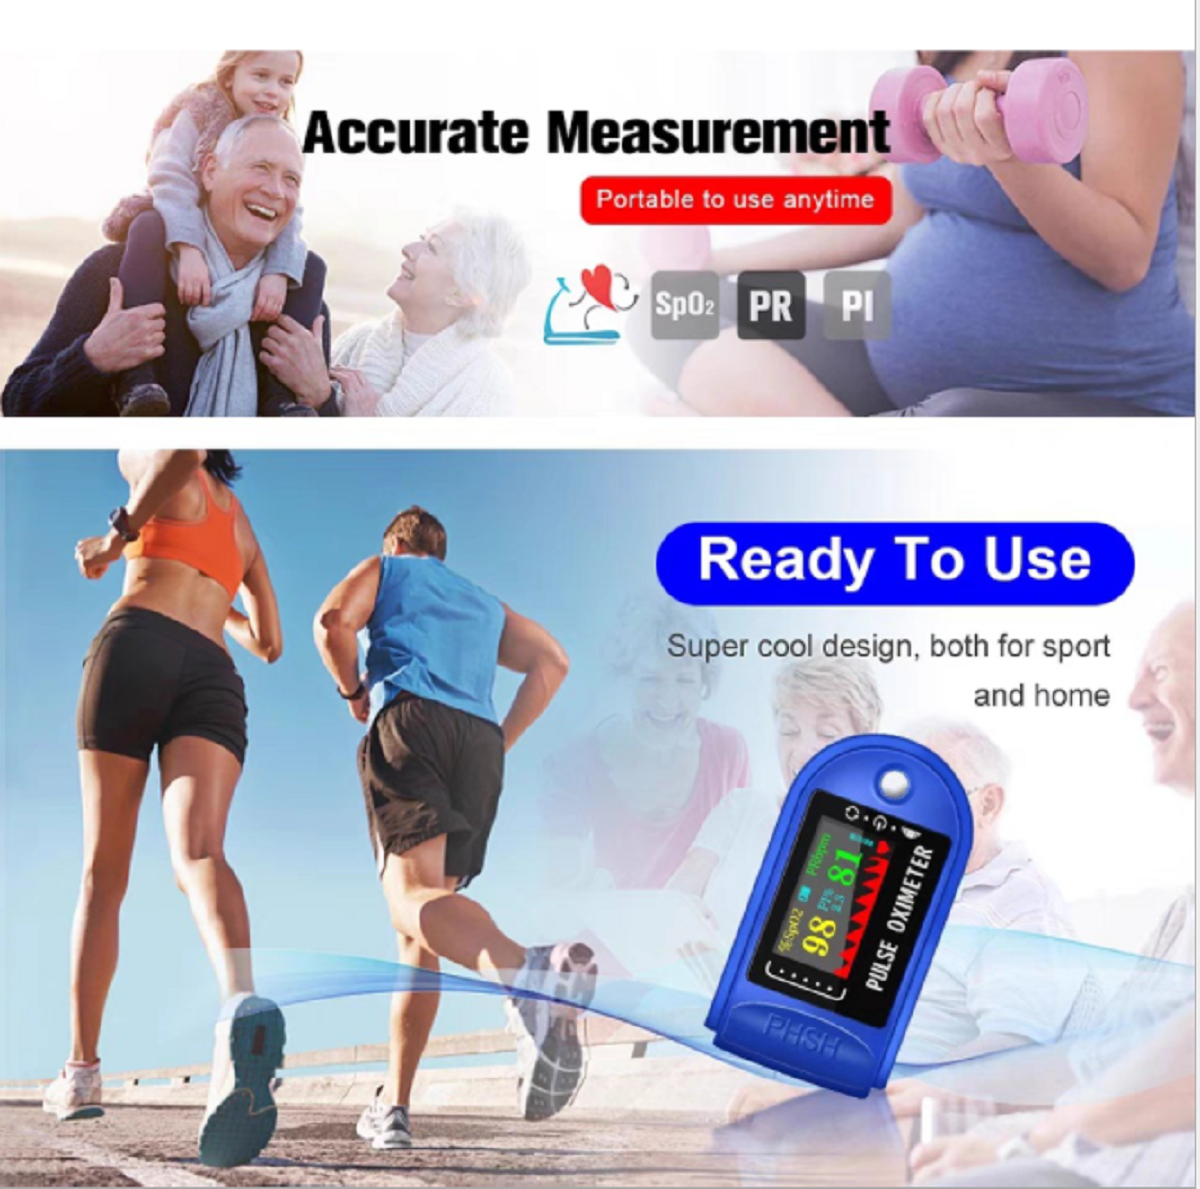 Household oxygen saturation monitoring heart rate monitoring TFT oximeter pulse 